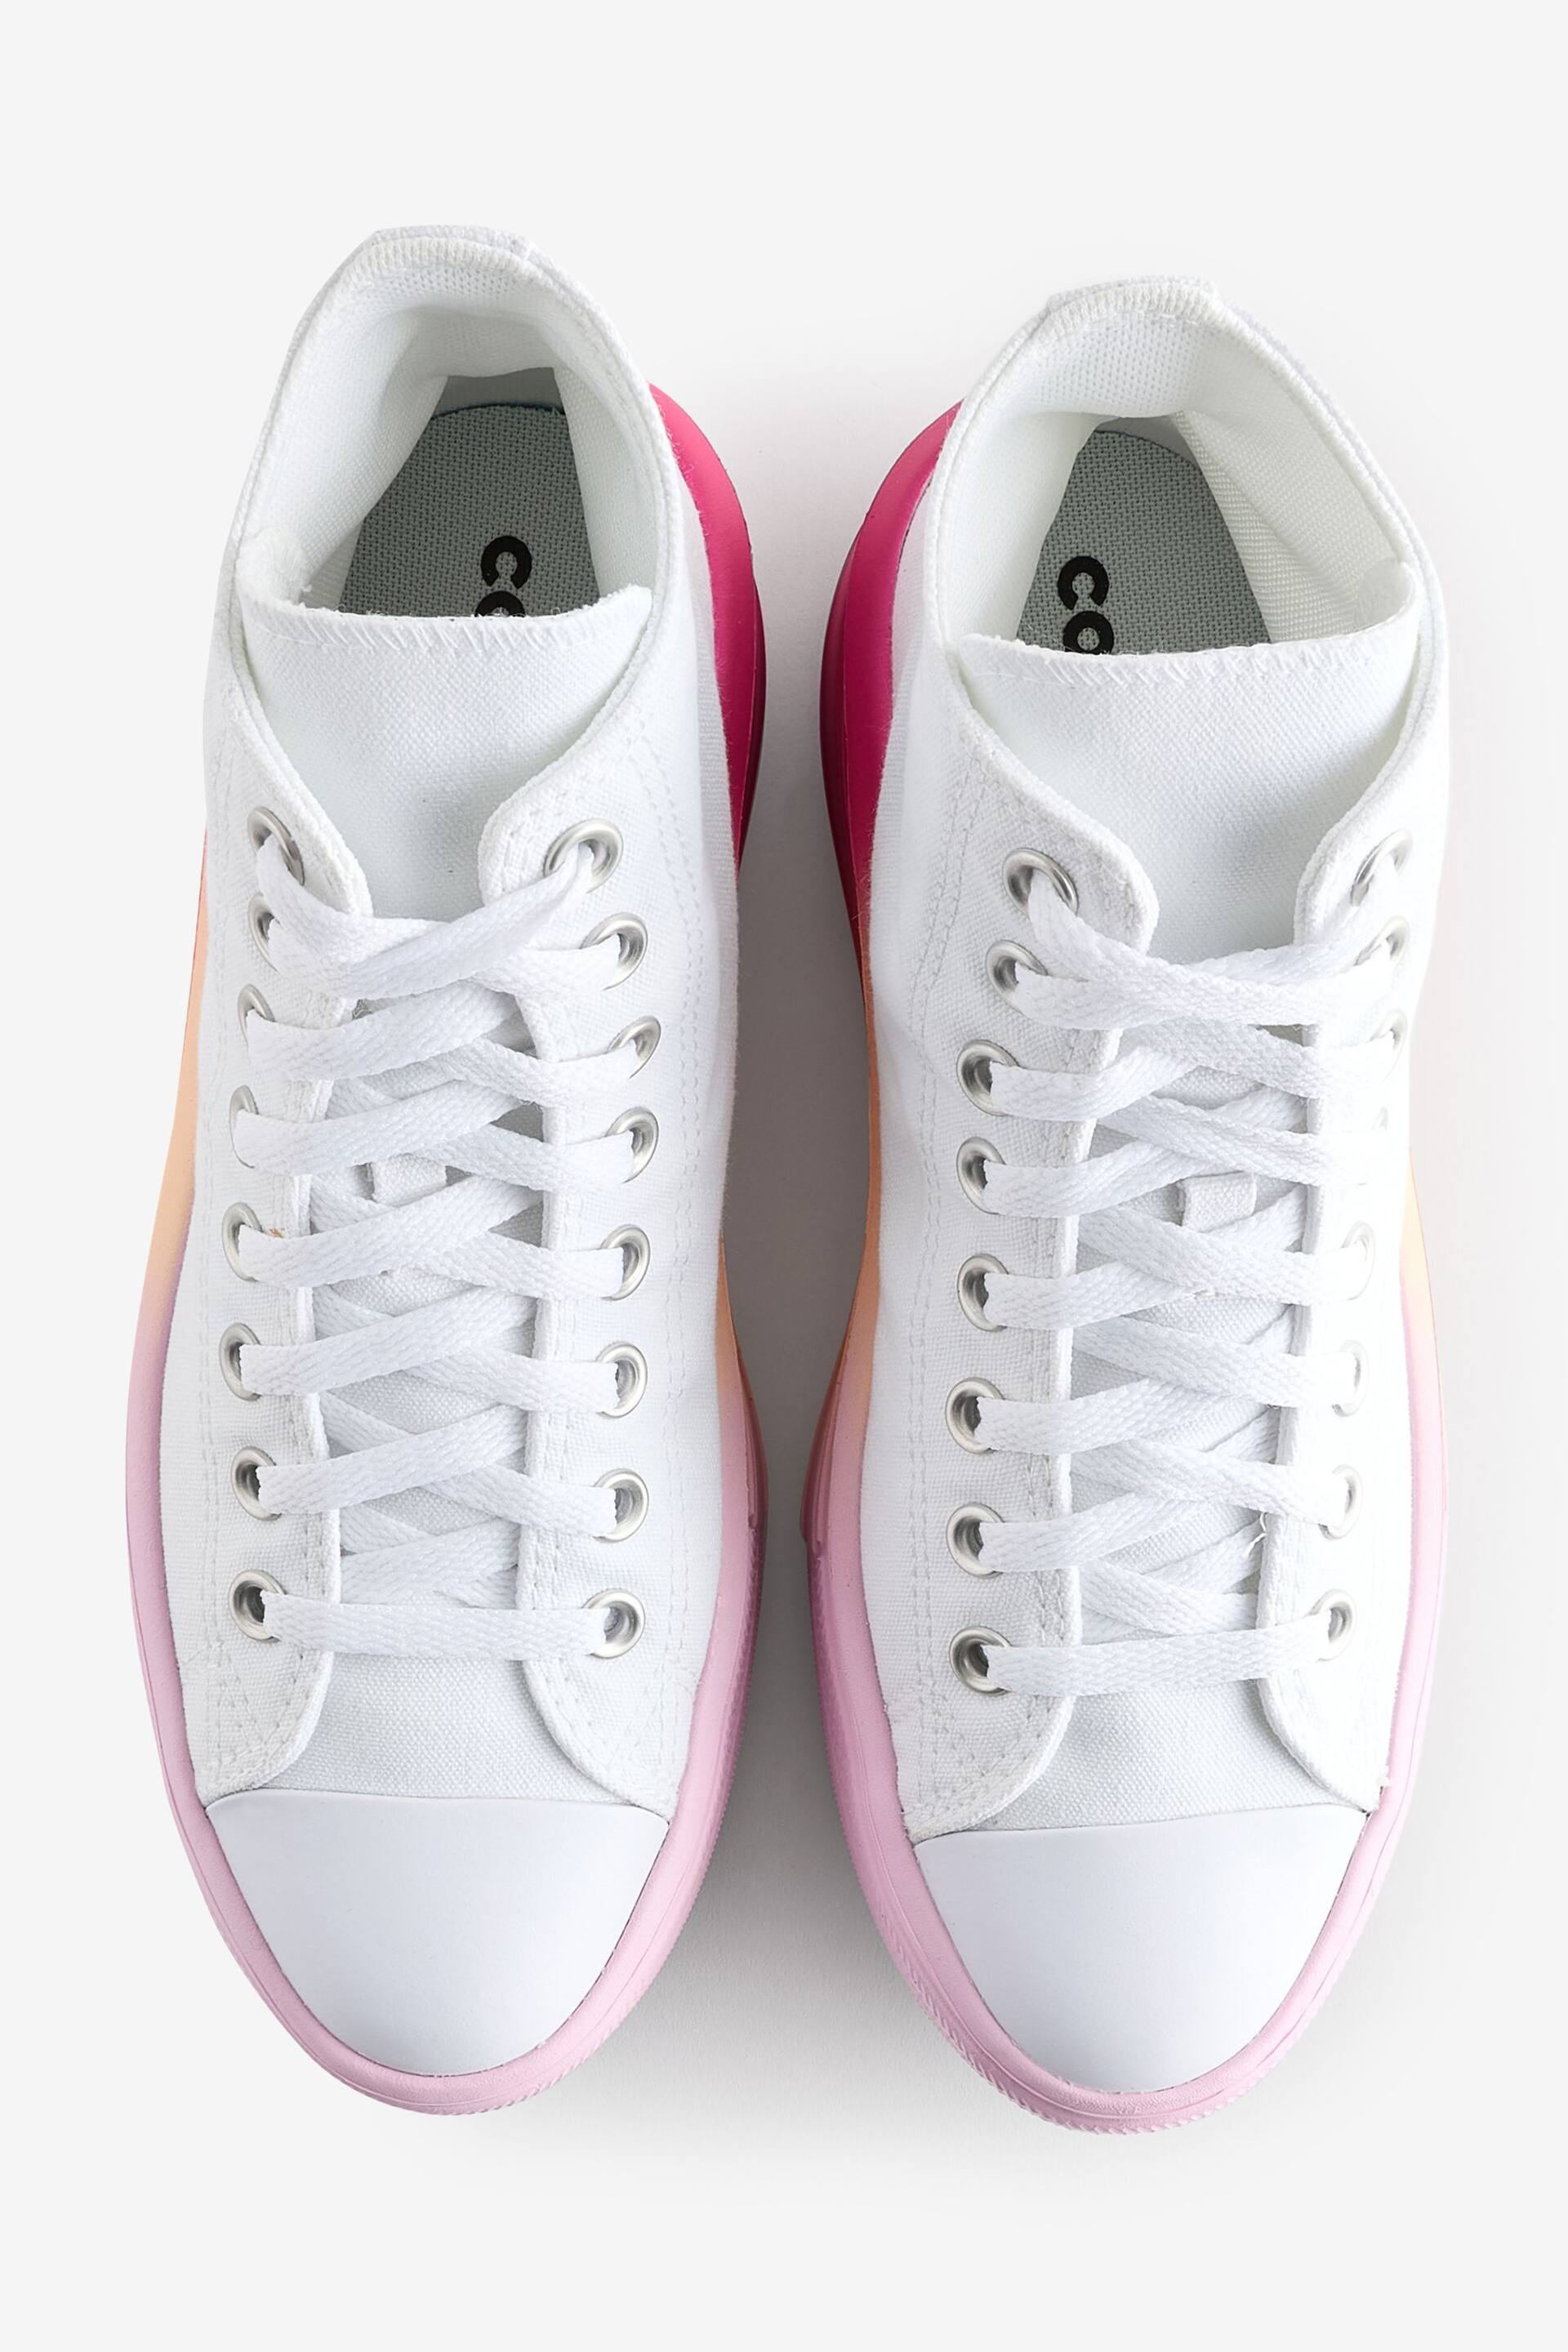 Converse White Ombre Move Platform Youth Trainers - Image 5 of 9